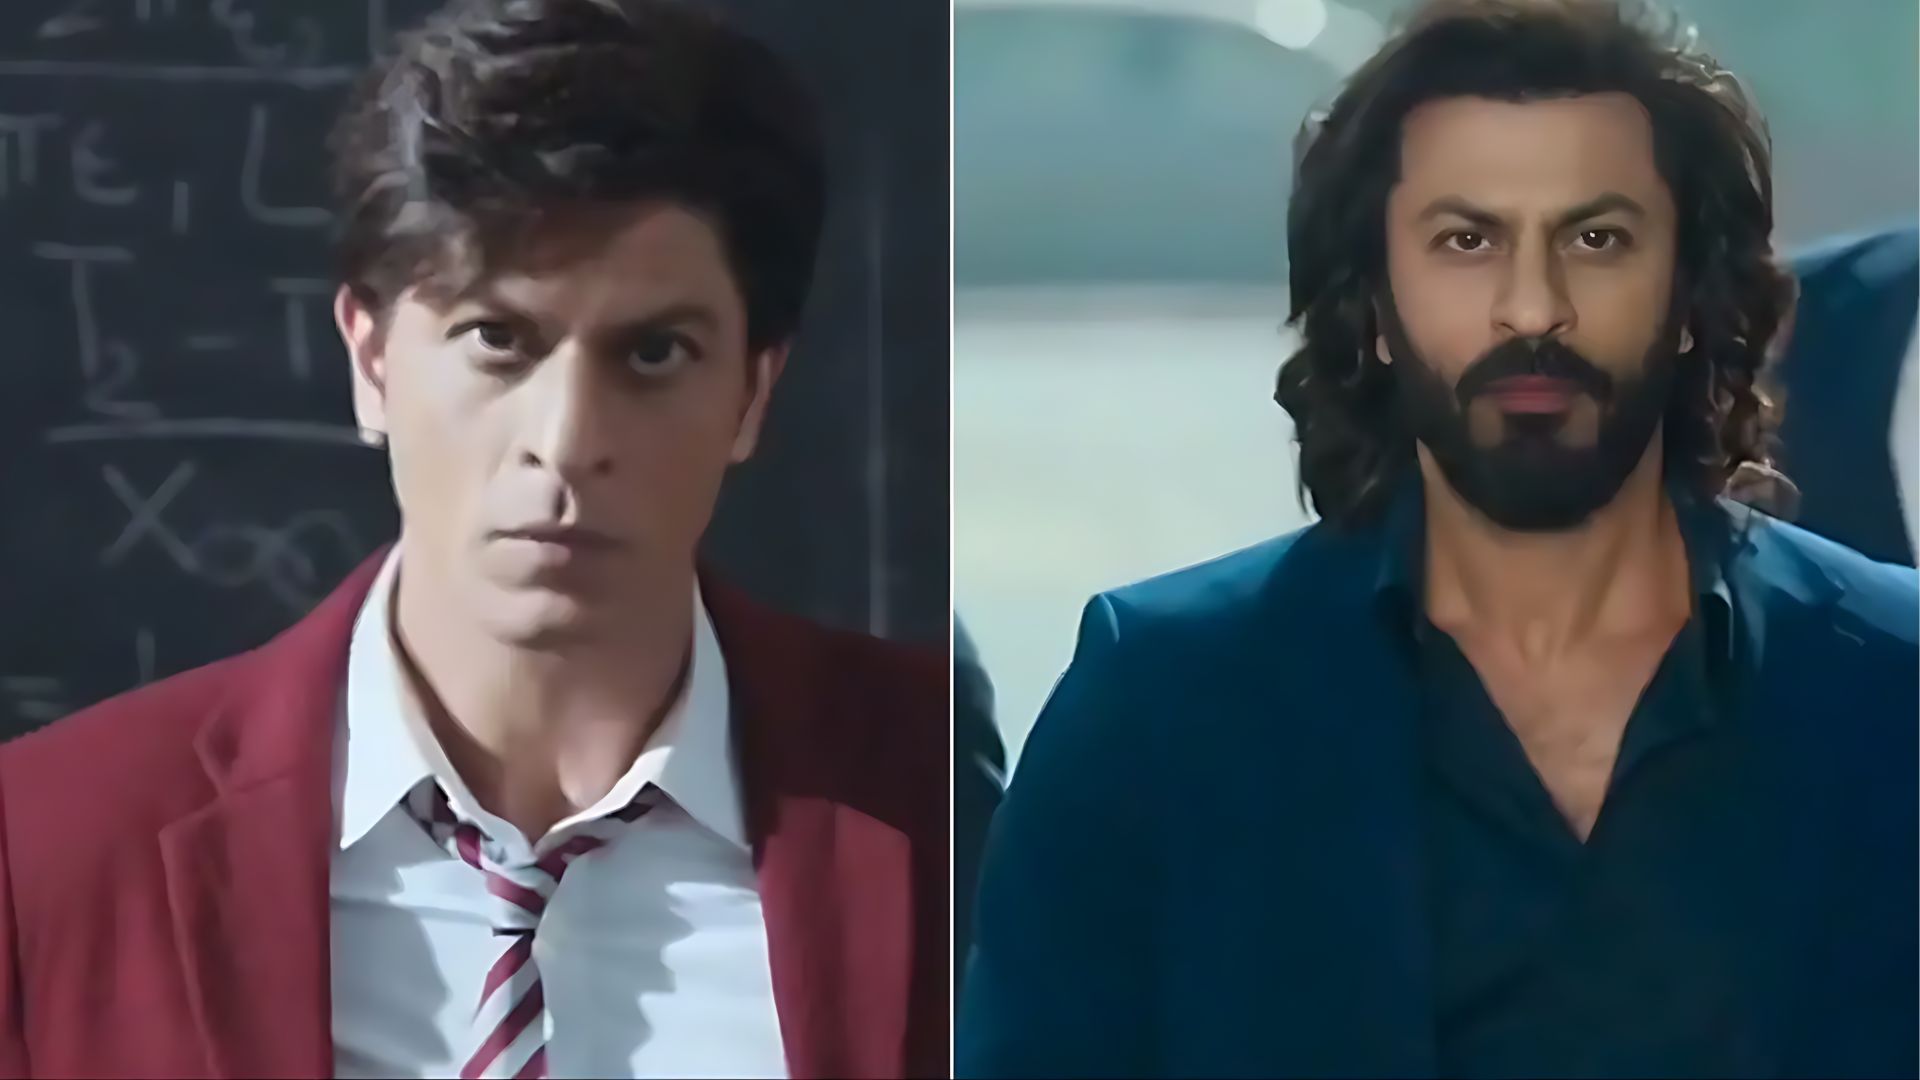 AI-Generated Video Imagines Shah Rukh Khan in ‘Animal’ Role, Sparks Fan Excitement